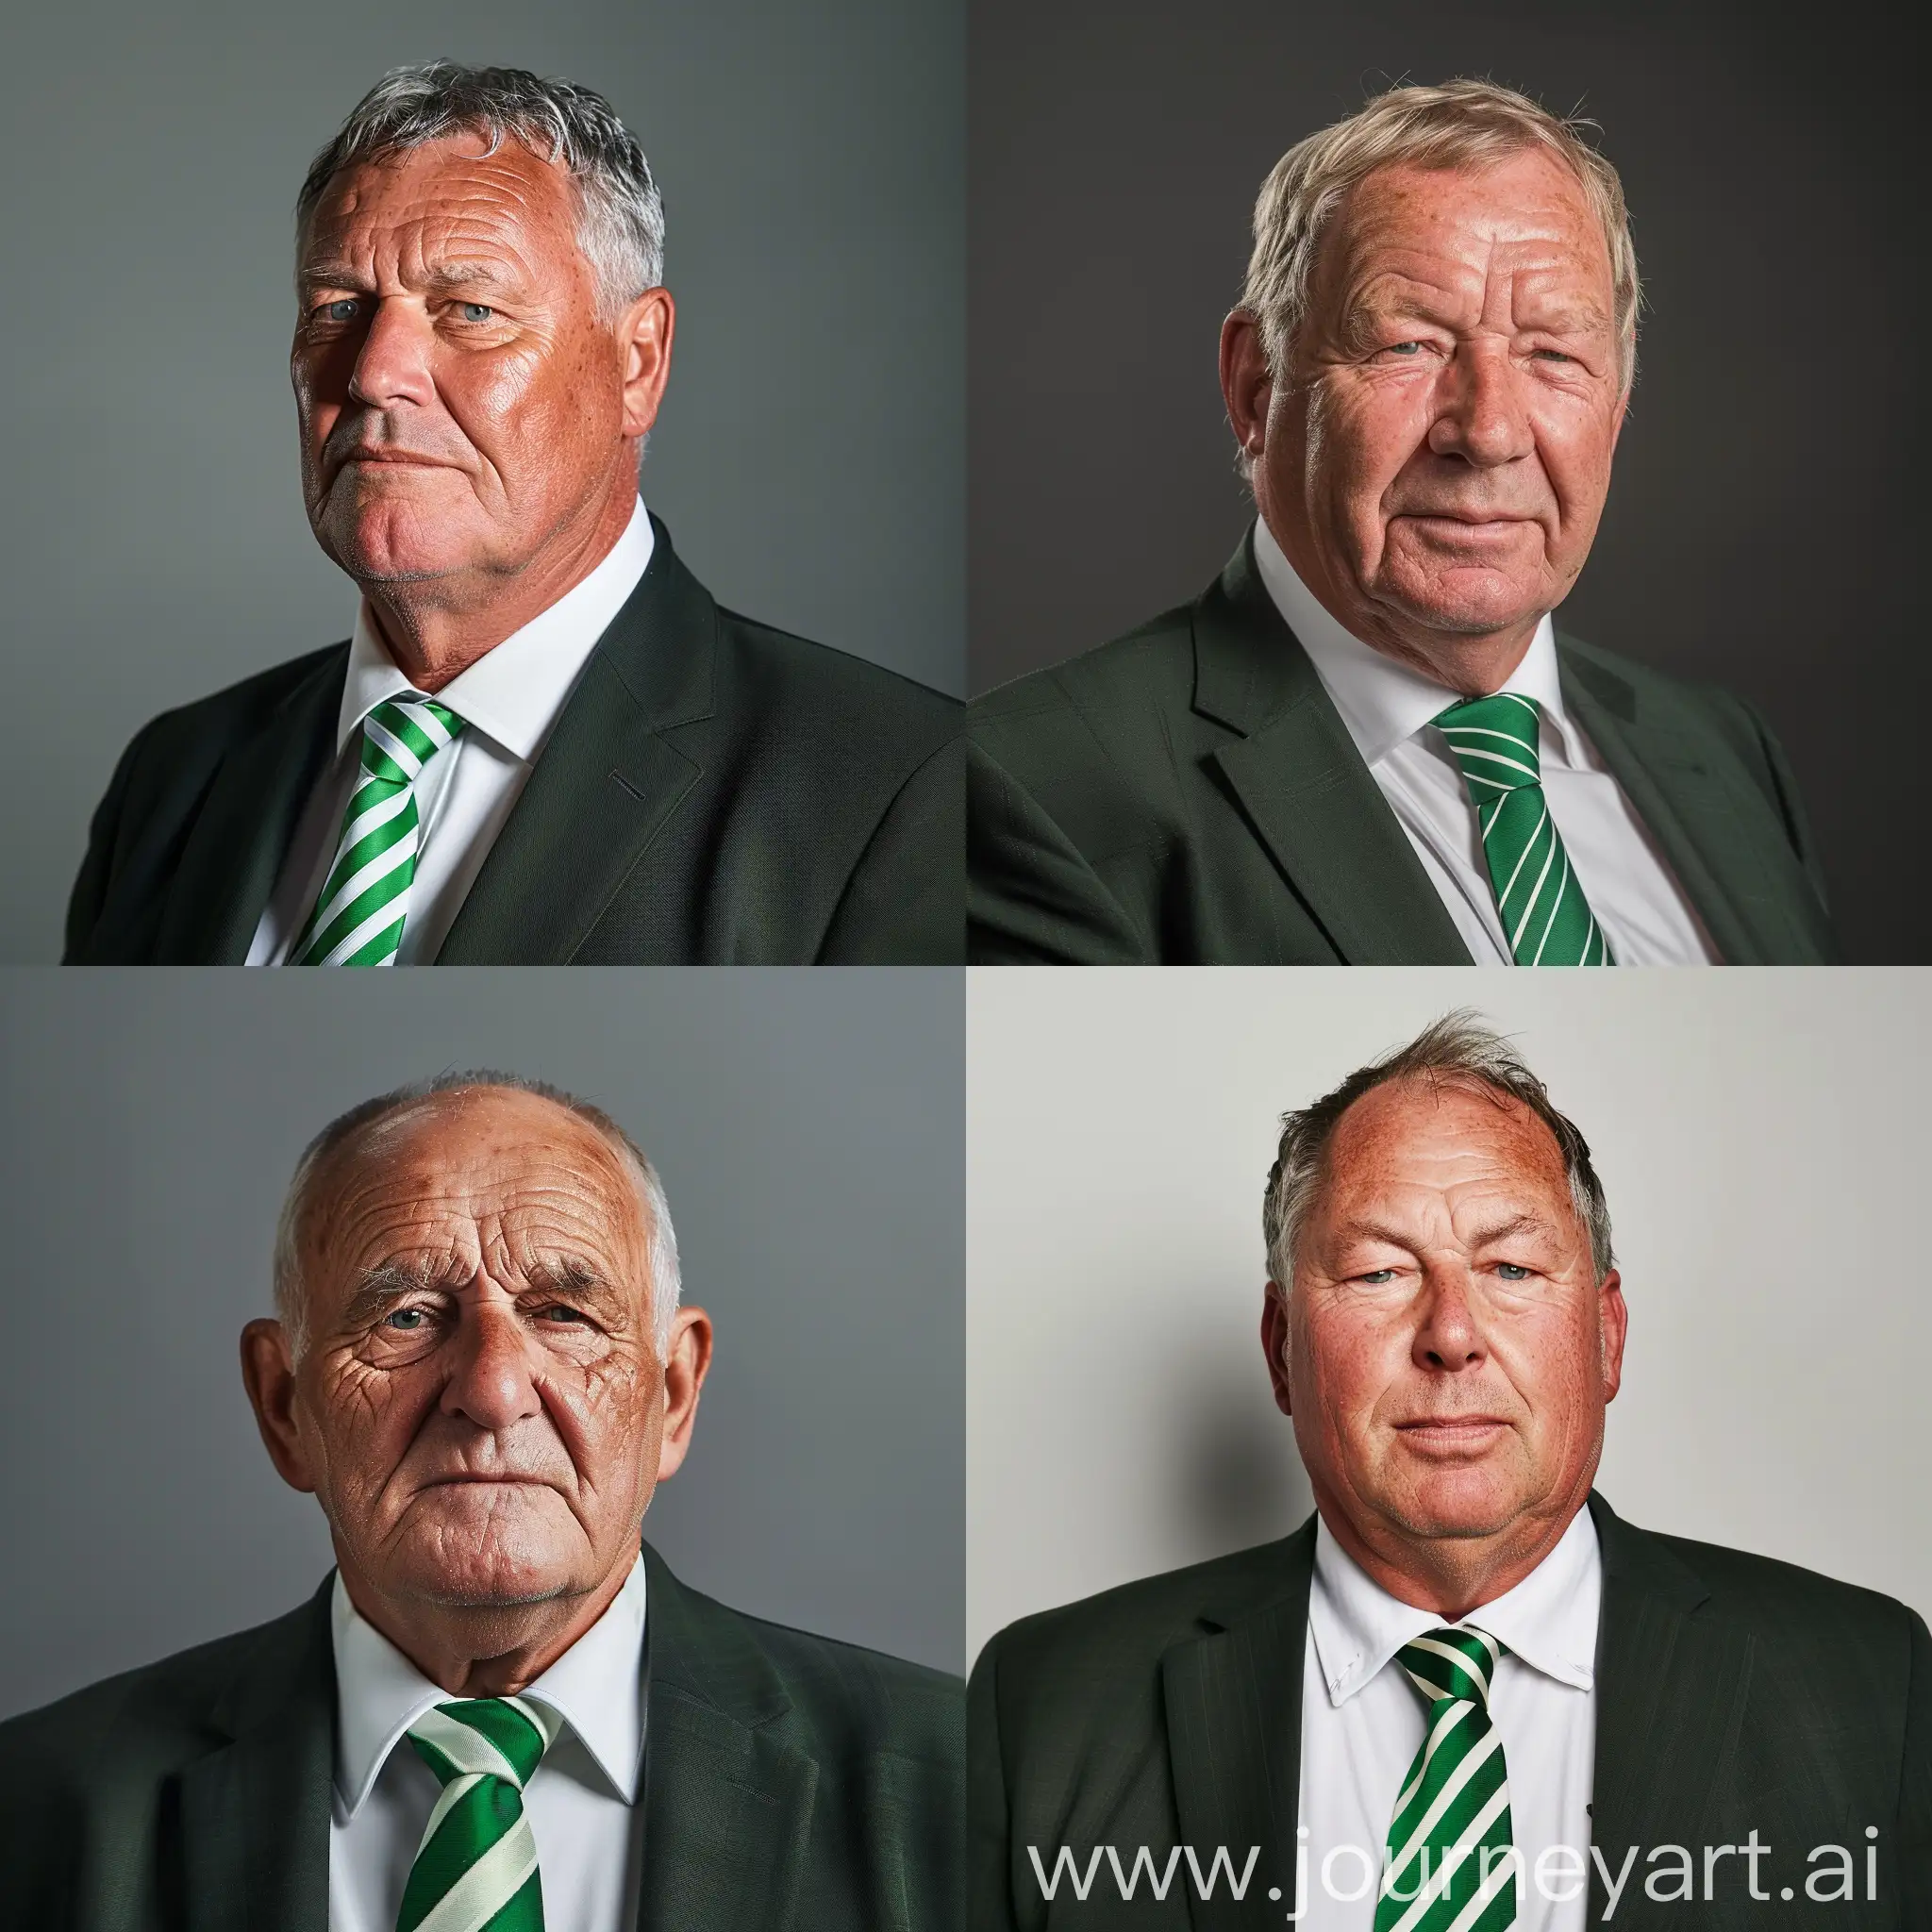 Realistic profile photo of the chairman of the football club Waltham Abbey. He is of British origin, in his fifties, slightly overweight. Suit and tie, green and white striped tie. In the style of facepack for game football manager 22.